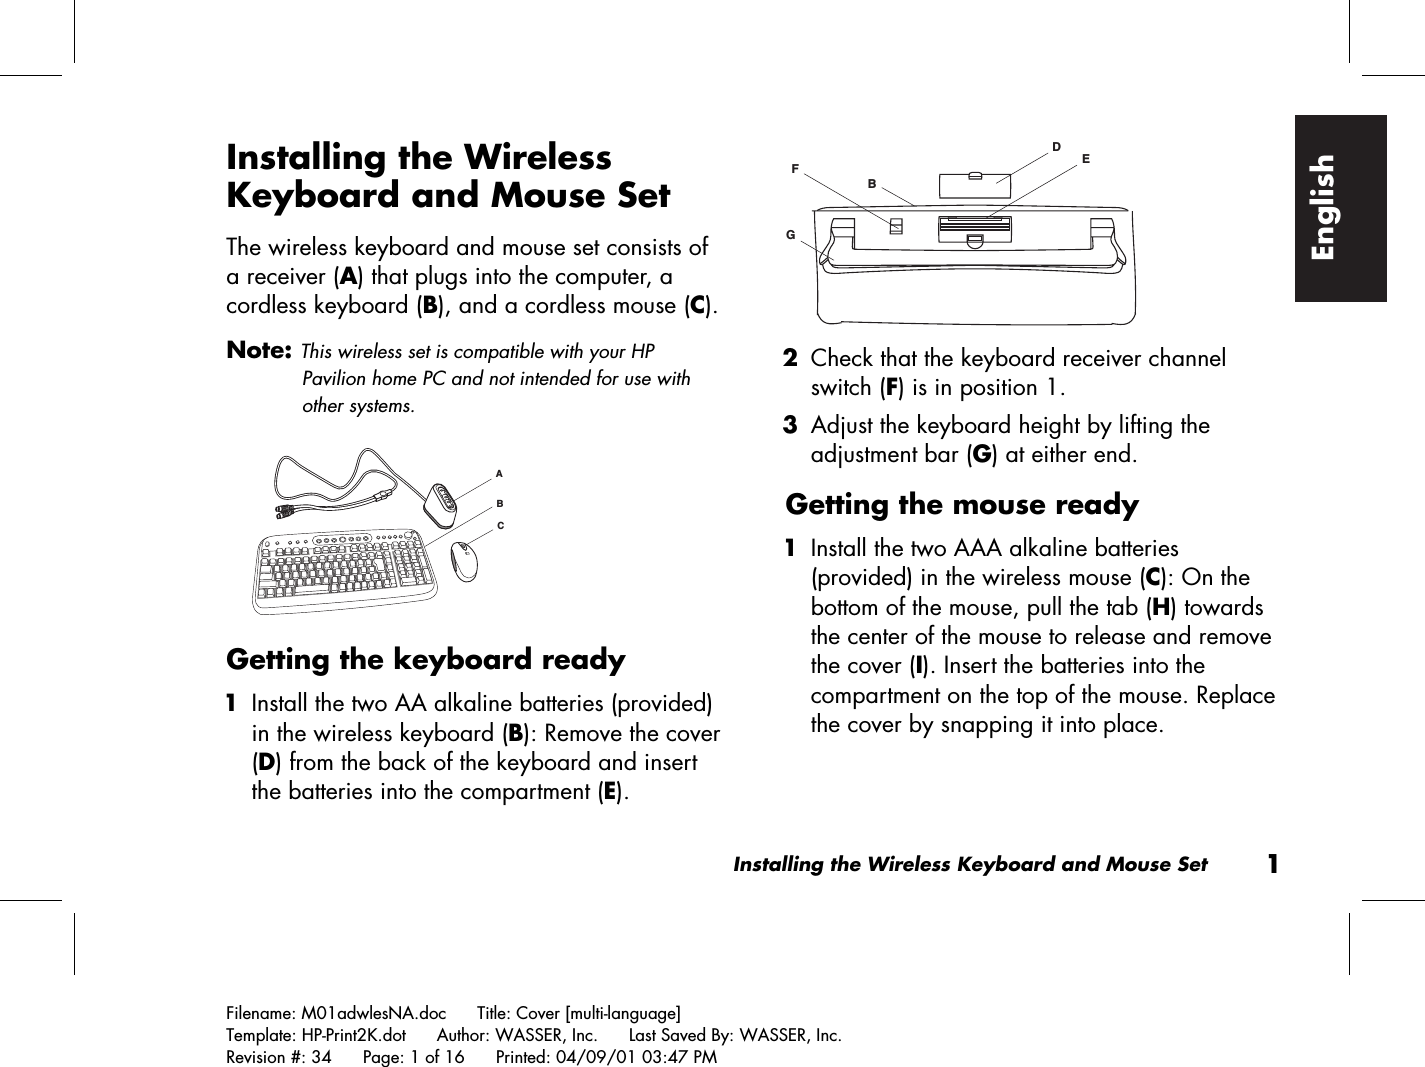 Installing the Wireless Keyboard and Mouse Set1Filename: M01adwlesNA.doc      Title: Cover [multi-language]Template: HP-Print2K.dot      Author: WASSER, Inc.      Last Saved By: WASSER, Inc.Revision #: 34      Page: 1 of 16      Printed: 04/09/01 03:47 PMEnglishInstalling the WirelessKeyboard and Mouse SetThe wireless keyboard and mouse set consists ofa receiver (A) that plugs into the computer, acordless keyboard (B), and a cordless mouse (C).Note: This wireless set is compatible with your HPPavilion home PC and not intended for use withother systems.ACBGetting the keyboard ready 1 Install the two AA alkaline batteries (provided)in the wireless keyboard (B): Remove the cover(D) from the back of the keyboard and insertthe batteries into the compartment (E).DEGFB 2 Check that the keyboard receiver channelswitch (F) is in position 1. 3 Adjust the keyboard height by lifting theadjustment bar (G) at either end.Getting the mouse ready 1 Install the two AAA alkaline batteries(provided) in the wireless mouse (C): On thebottom of the mouse, pull the tab (H) towardsthe center of the mouse to release and removethe cover (I). Insert the batteries into thecompartment on the top of the mouse. Replacethe cover by snapping it into place.